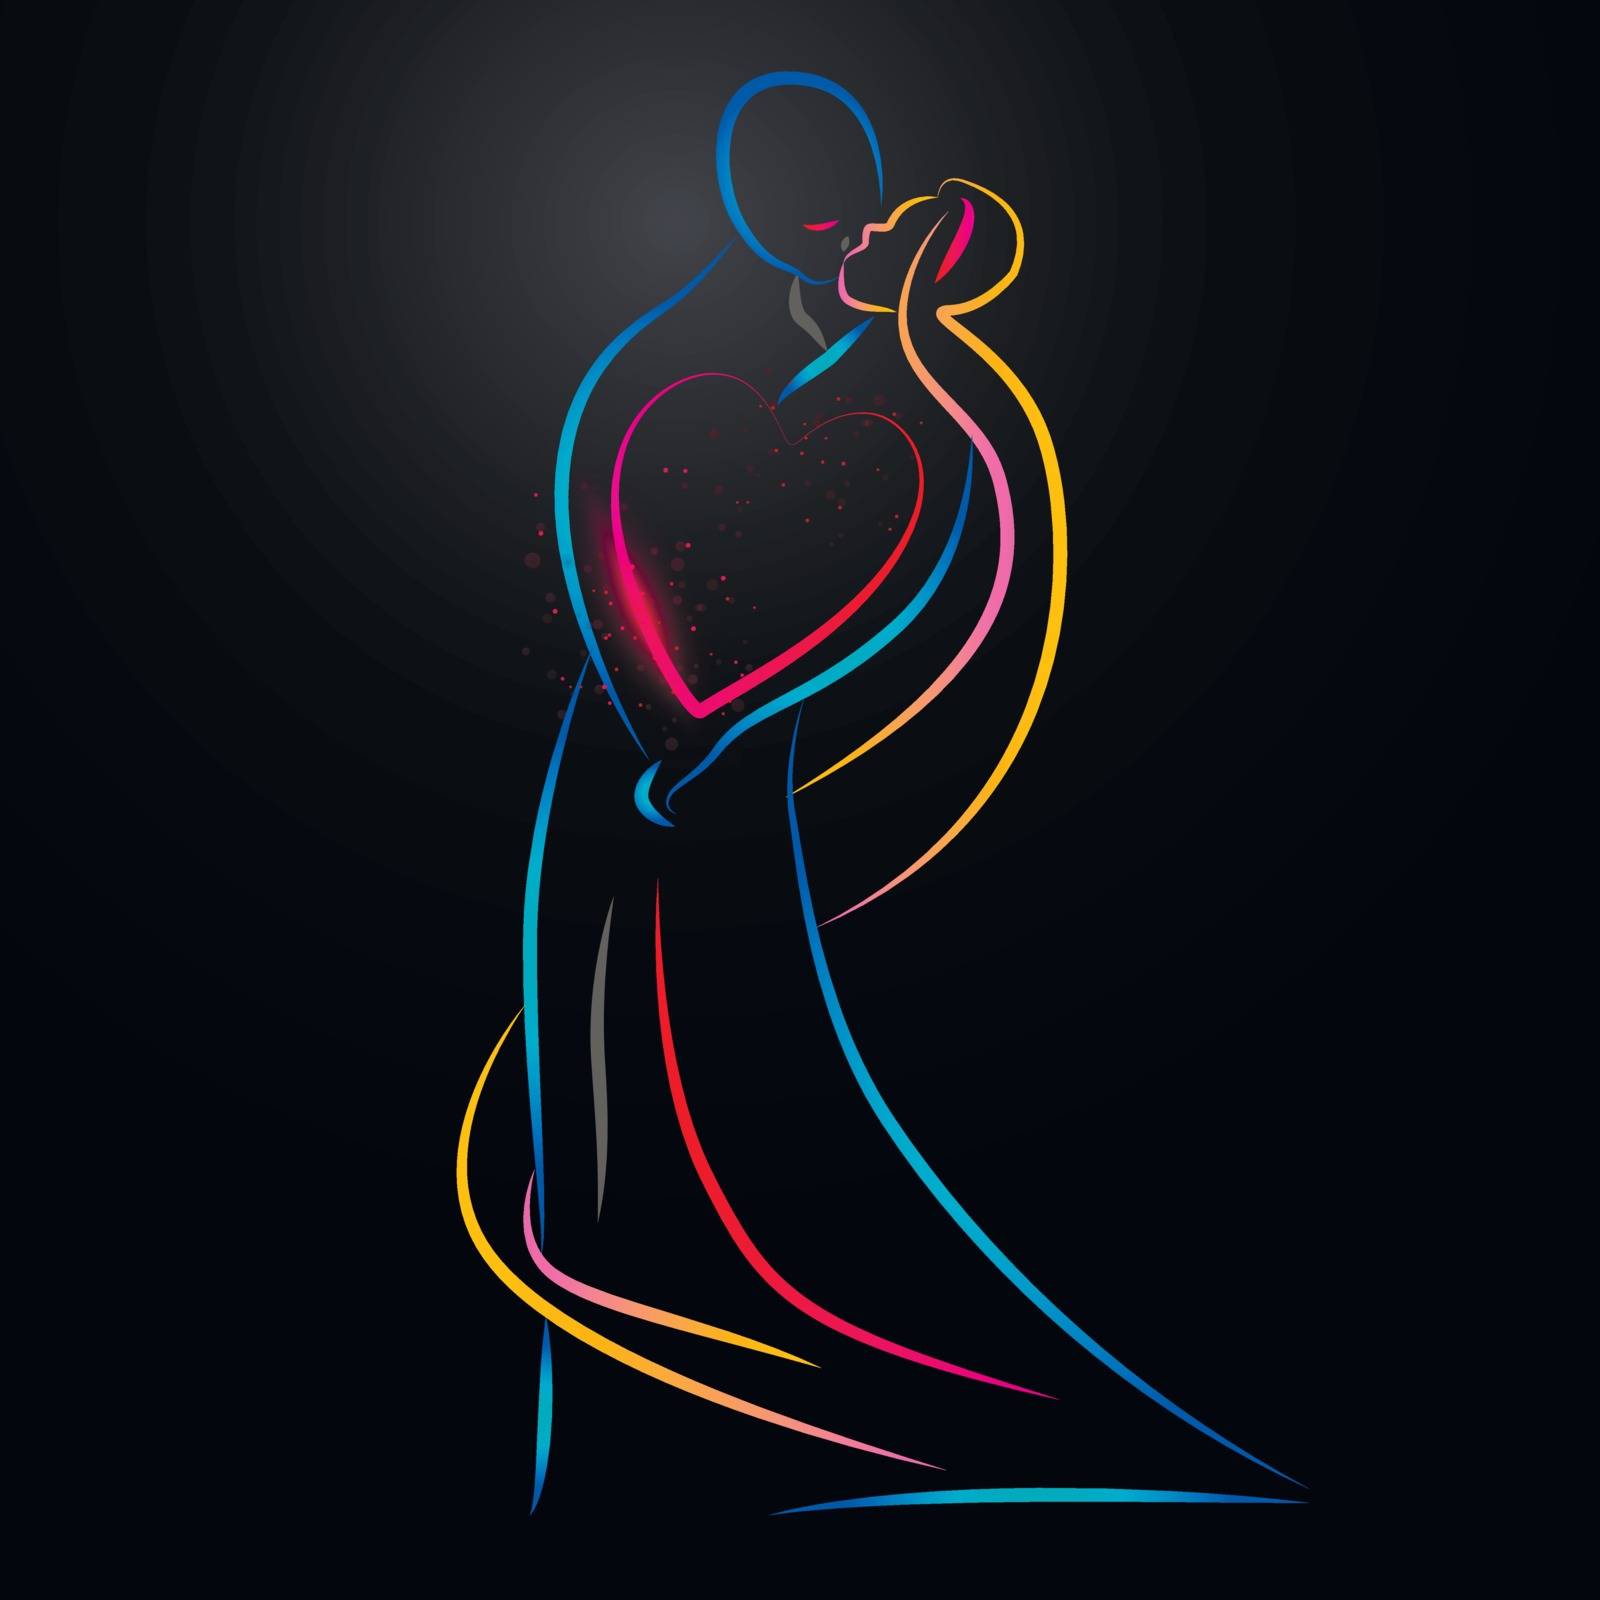 Vecror illustration of a colorful kissing couple